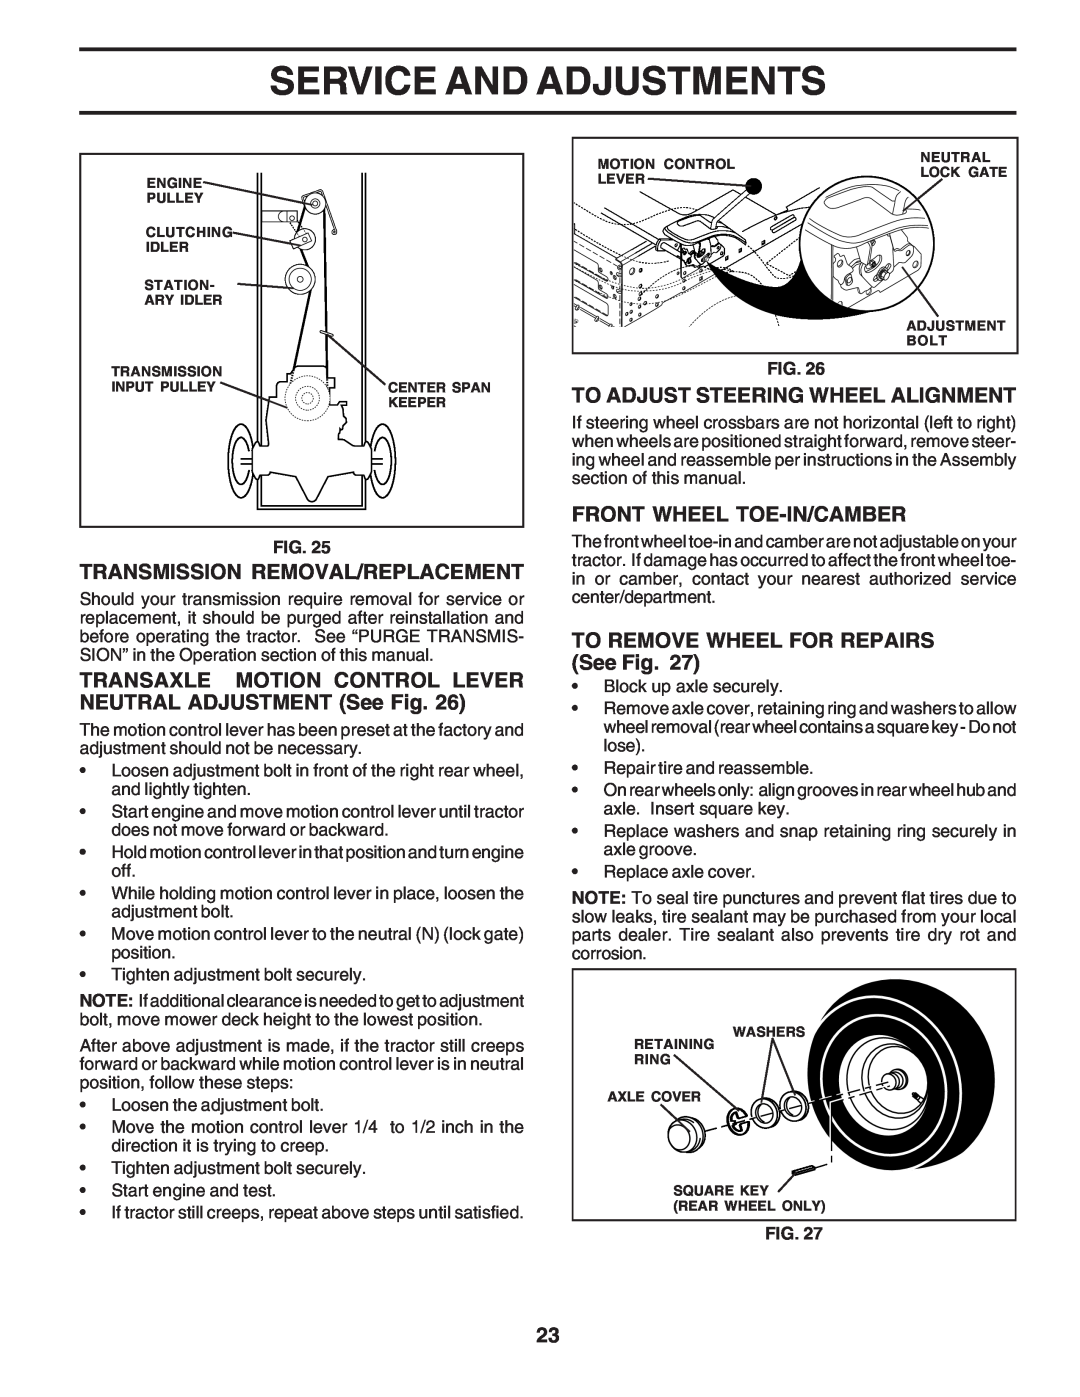 Poulan 183255 owner manual Transmission Removal/Replacement, TRANSAXLE MOTION CONTROL LEVER NEUTRAL ADJUSTMENT See Fig 